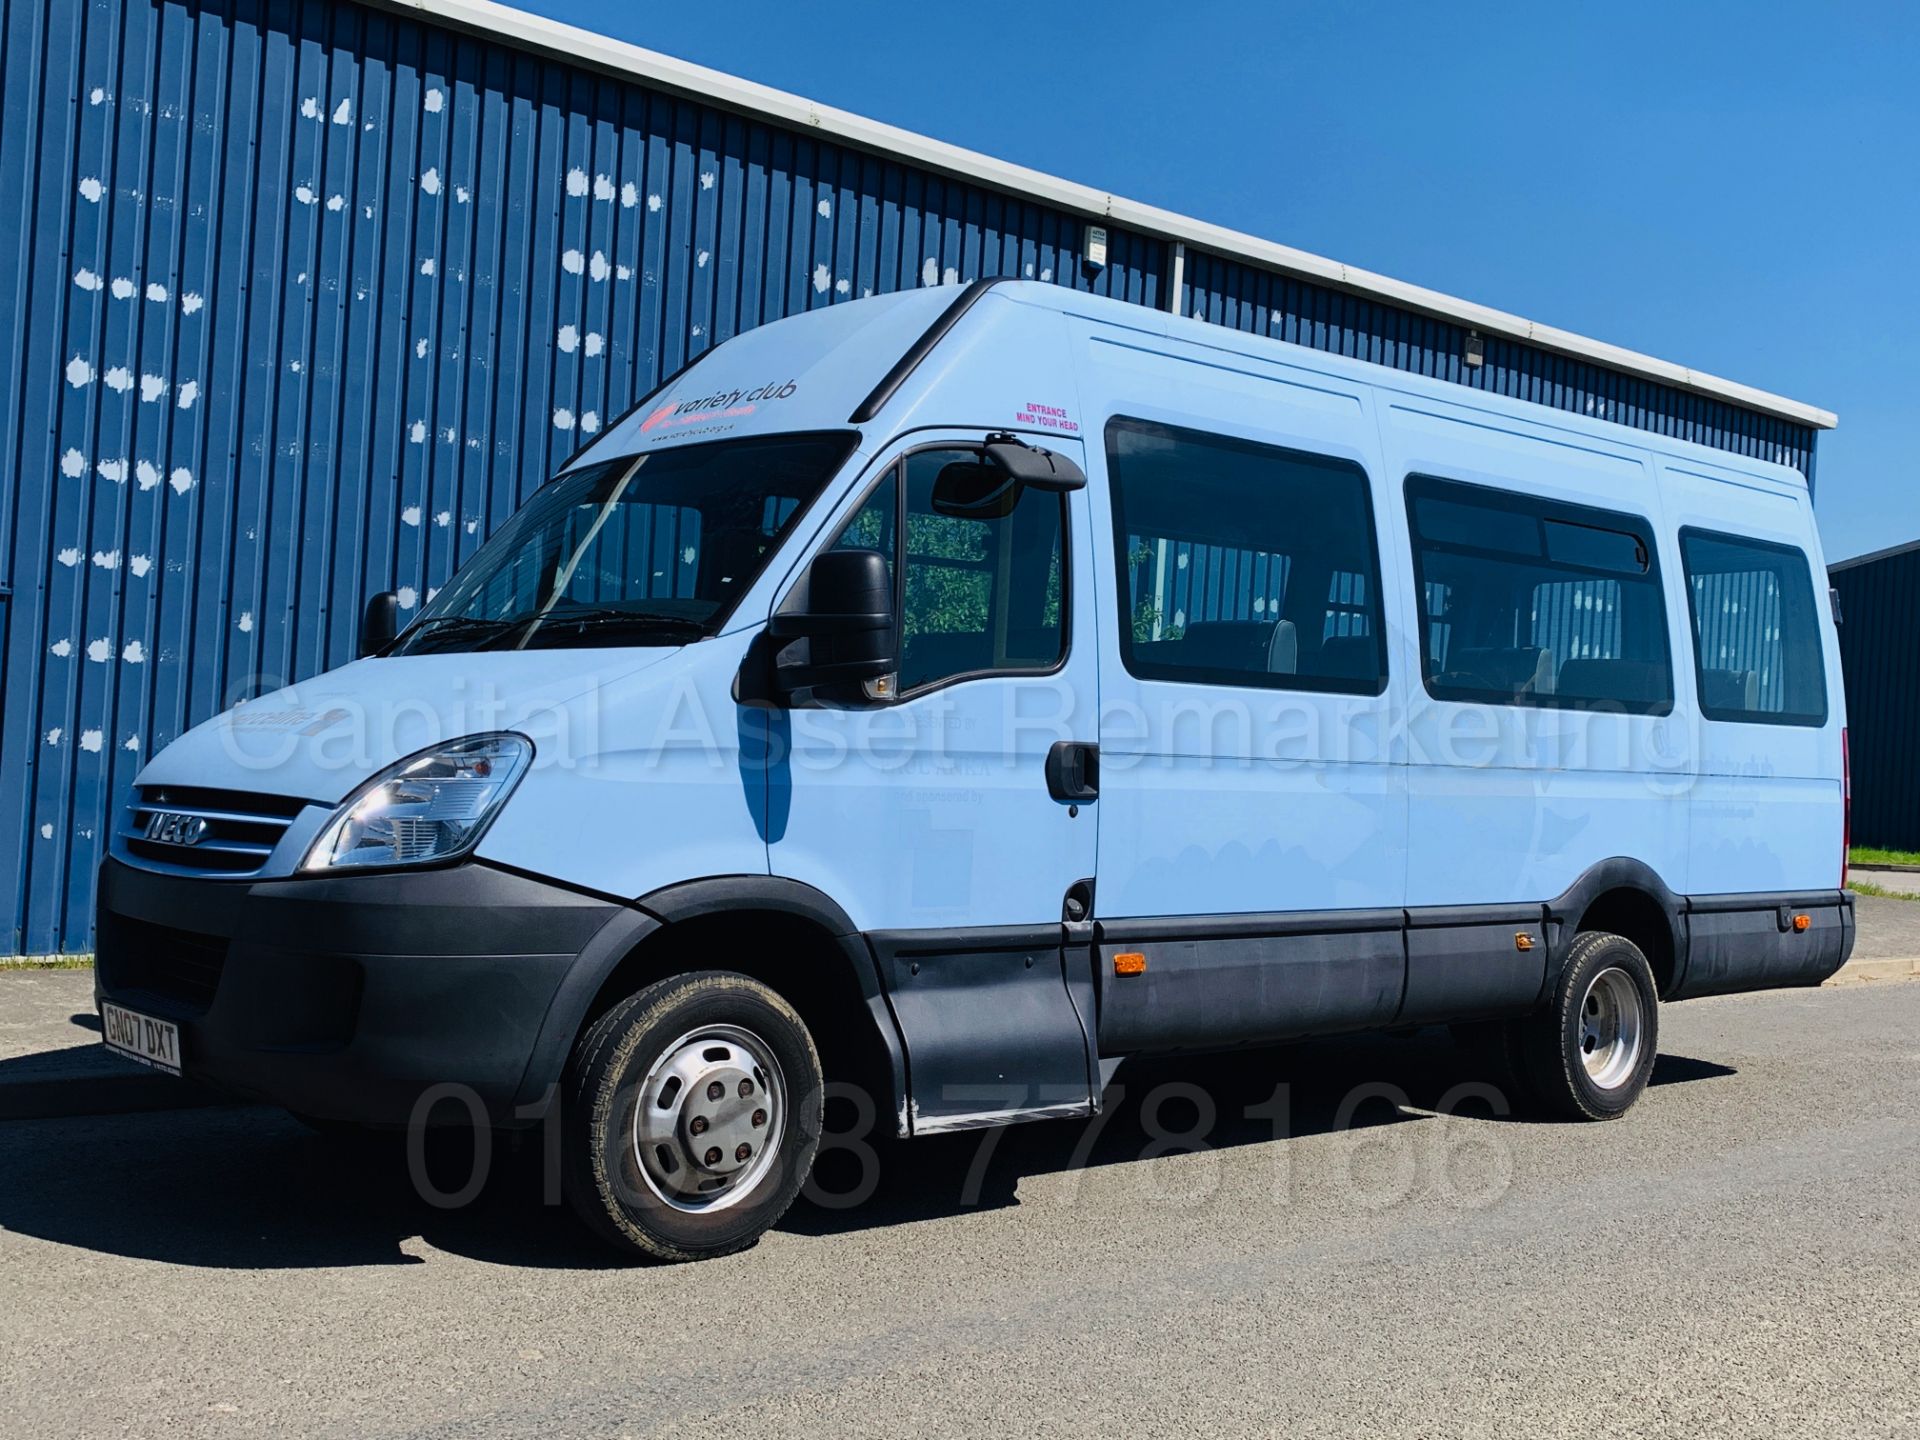 IVECO DAILY 40C12 *LWB - 16 SEATER MINI-BUS / COACH* (2007) **ONLY 11K MILES GENUINE** (FULL MOT) - Image 2 of 46